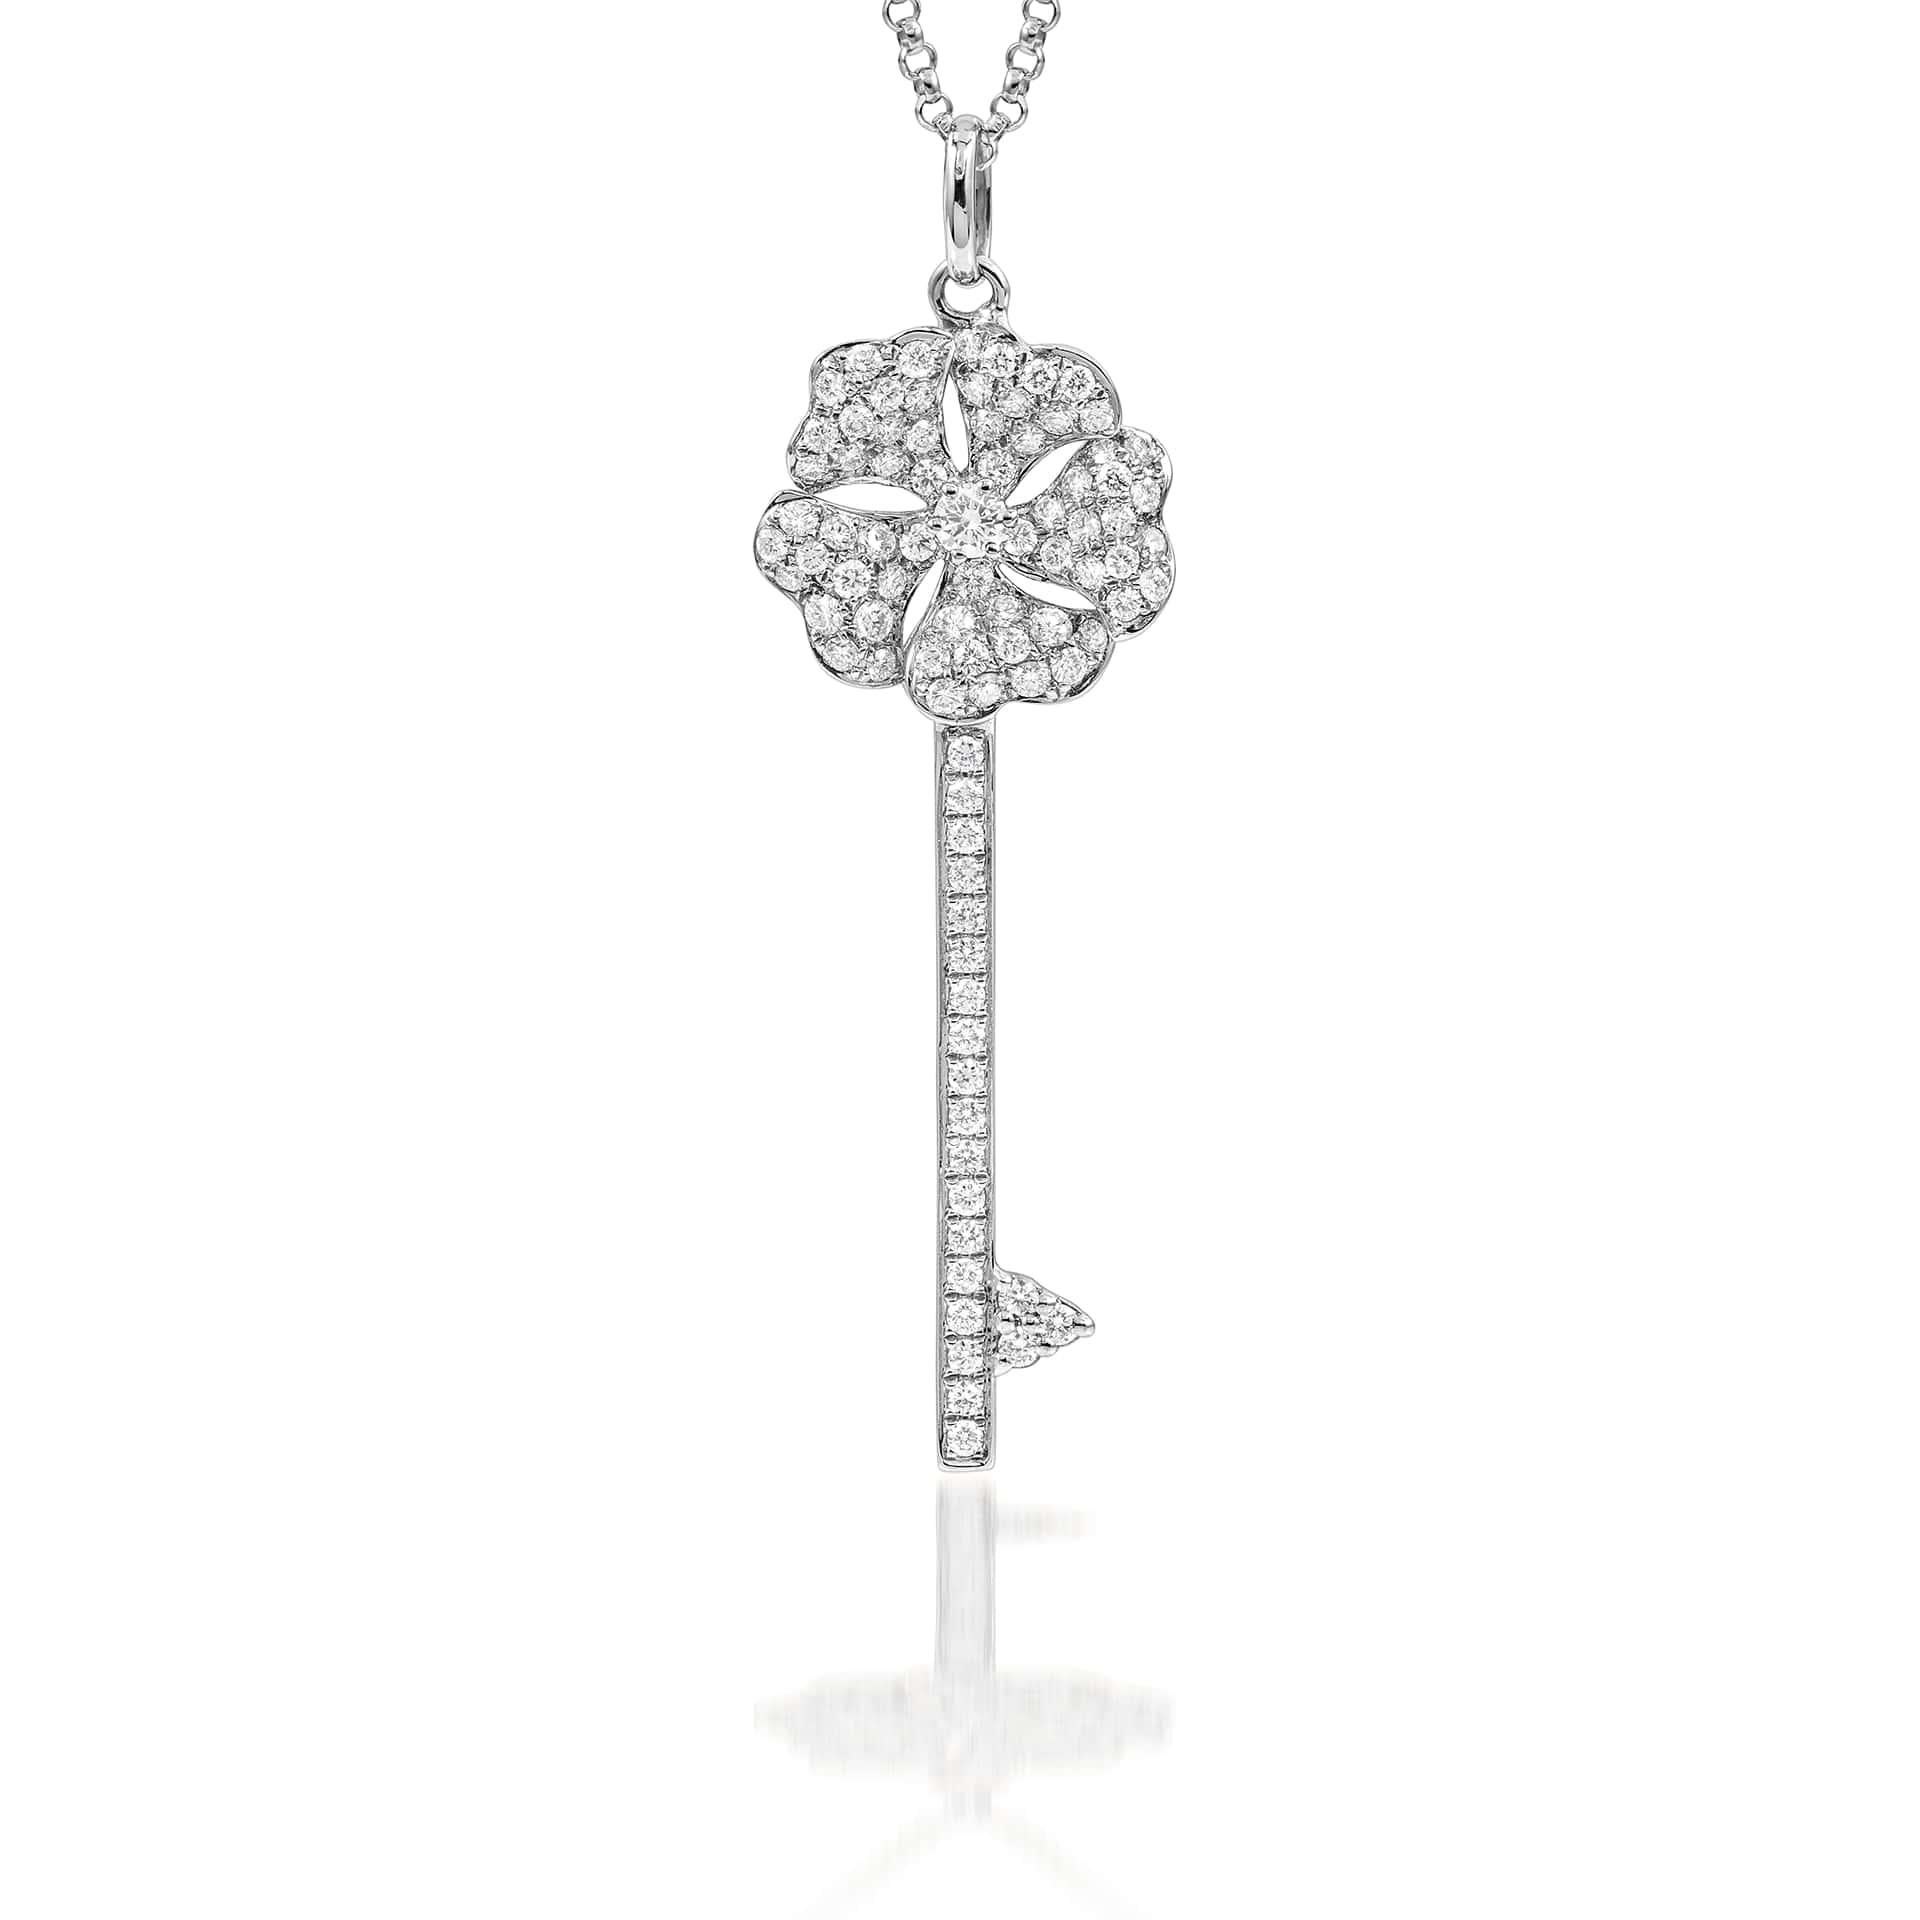 Bloom Diamond Key Necklace in 18K White Gold

Inspired by the exquisite petals of the alpine cinquefoil flower, the Bloom collection combines the richness of diamonds and precious metals with the light versatility of this delicate, five-pointed